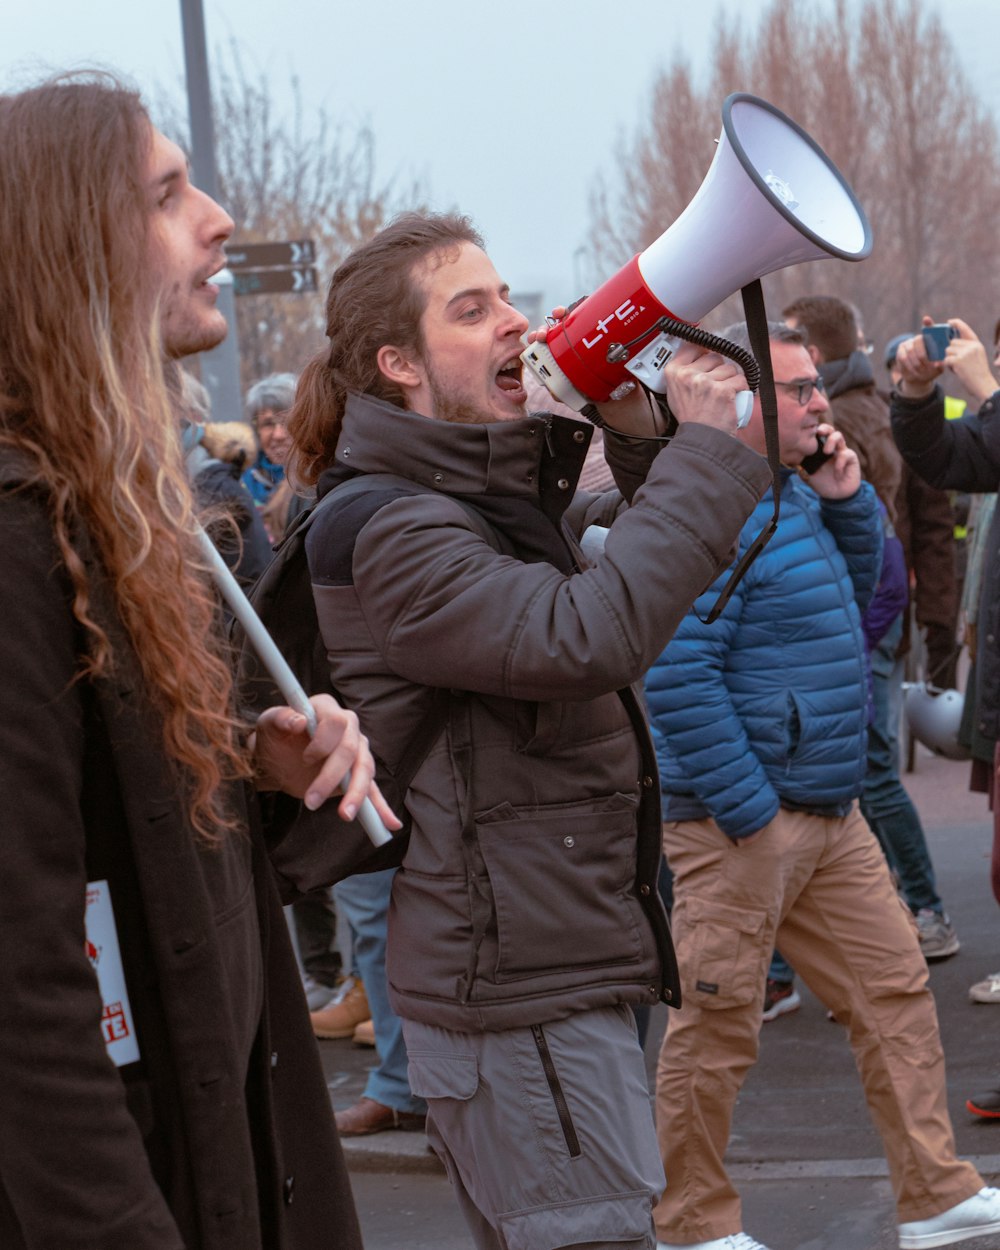 a man with long hair holding a red and white megaphone